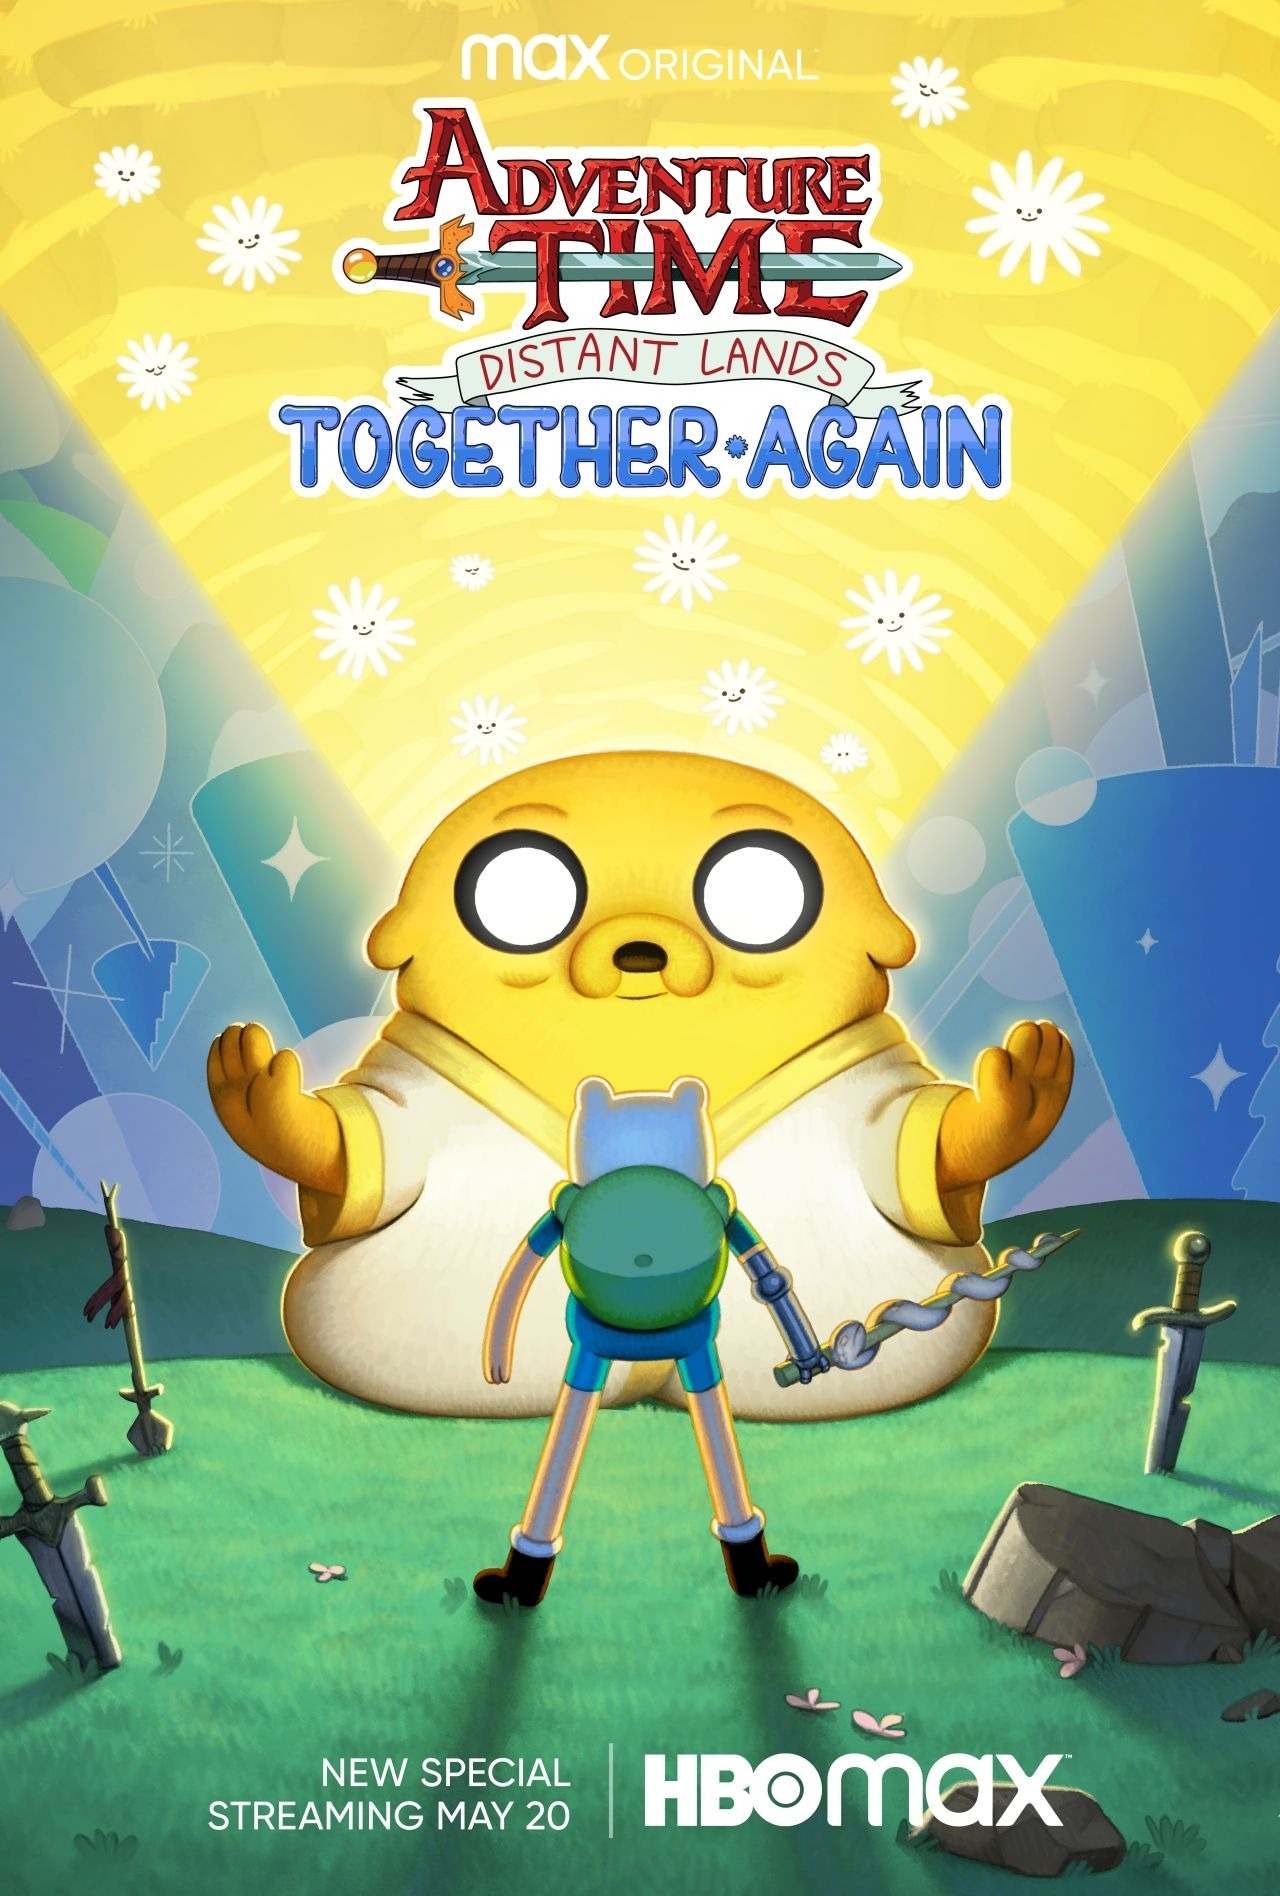 Now streaming on HBO Max … Adventure Time Distant Lands Together